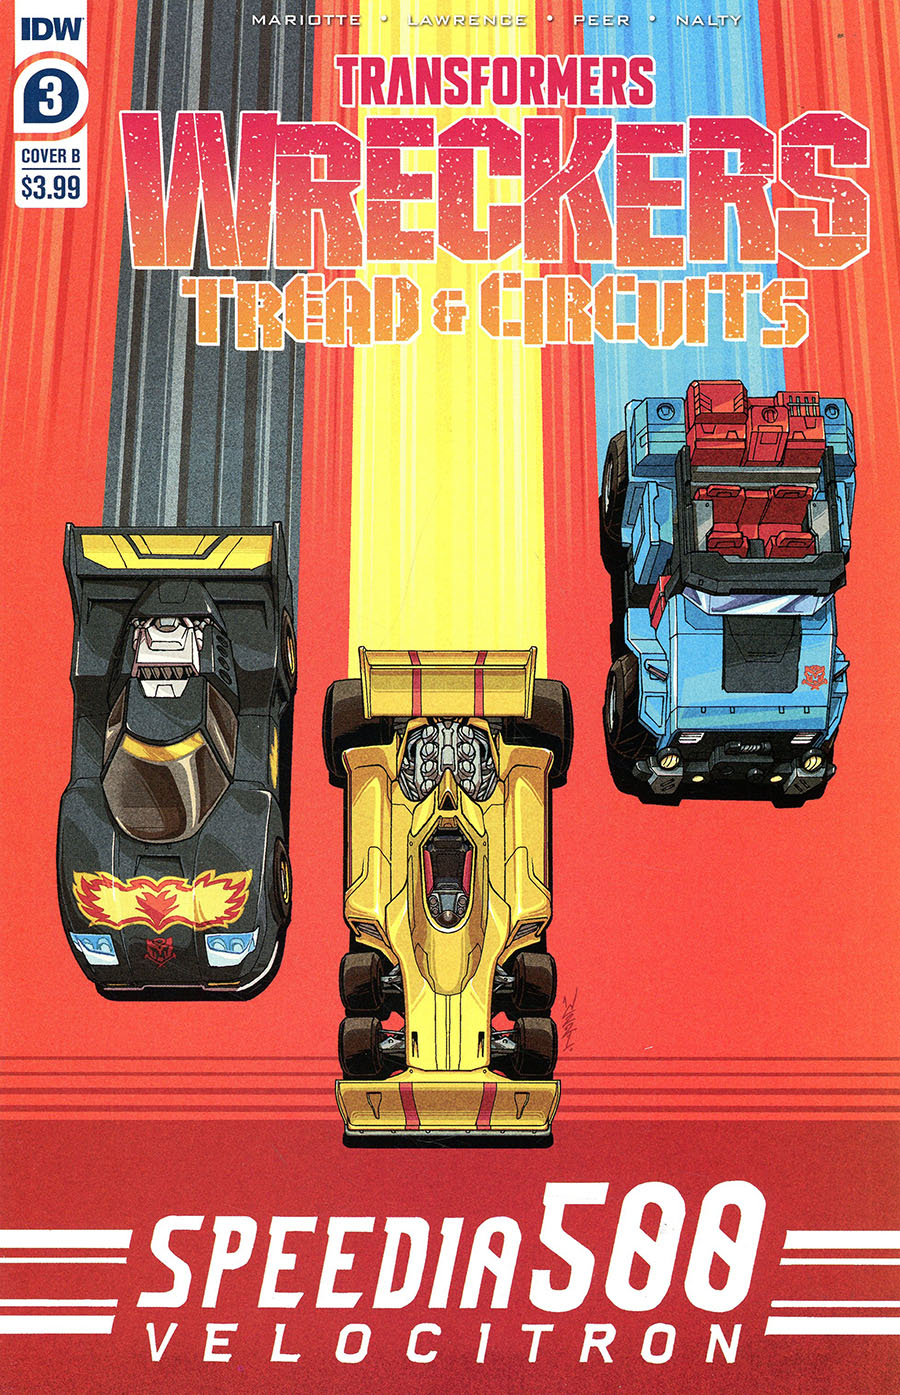 Transformers Wreckers Tread & Circuits #3 Cover B Variant Winston Chan Cover